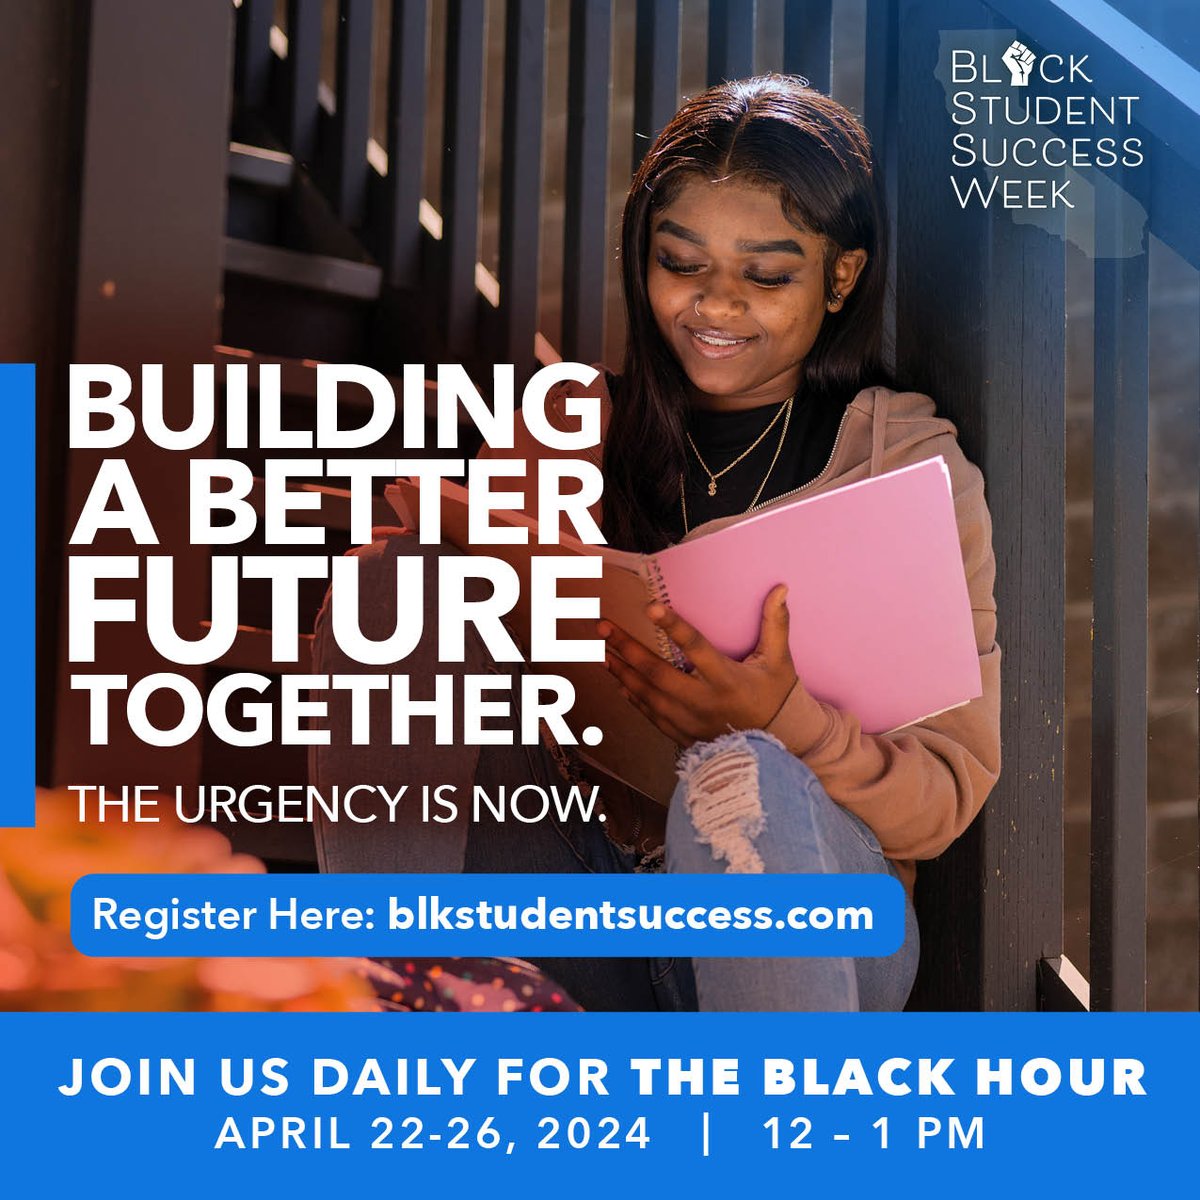 Join us for #TheBlackHour daily next week with FREE daily webinars that address challenges faced by black students and provide the necessary tools to excel academically, personally, and professionally.

Register at blkstudentsuccess.com

#BSSW24 #BlackStudentSuccessWeek